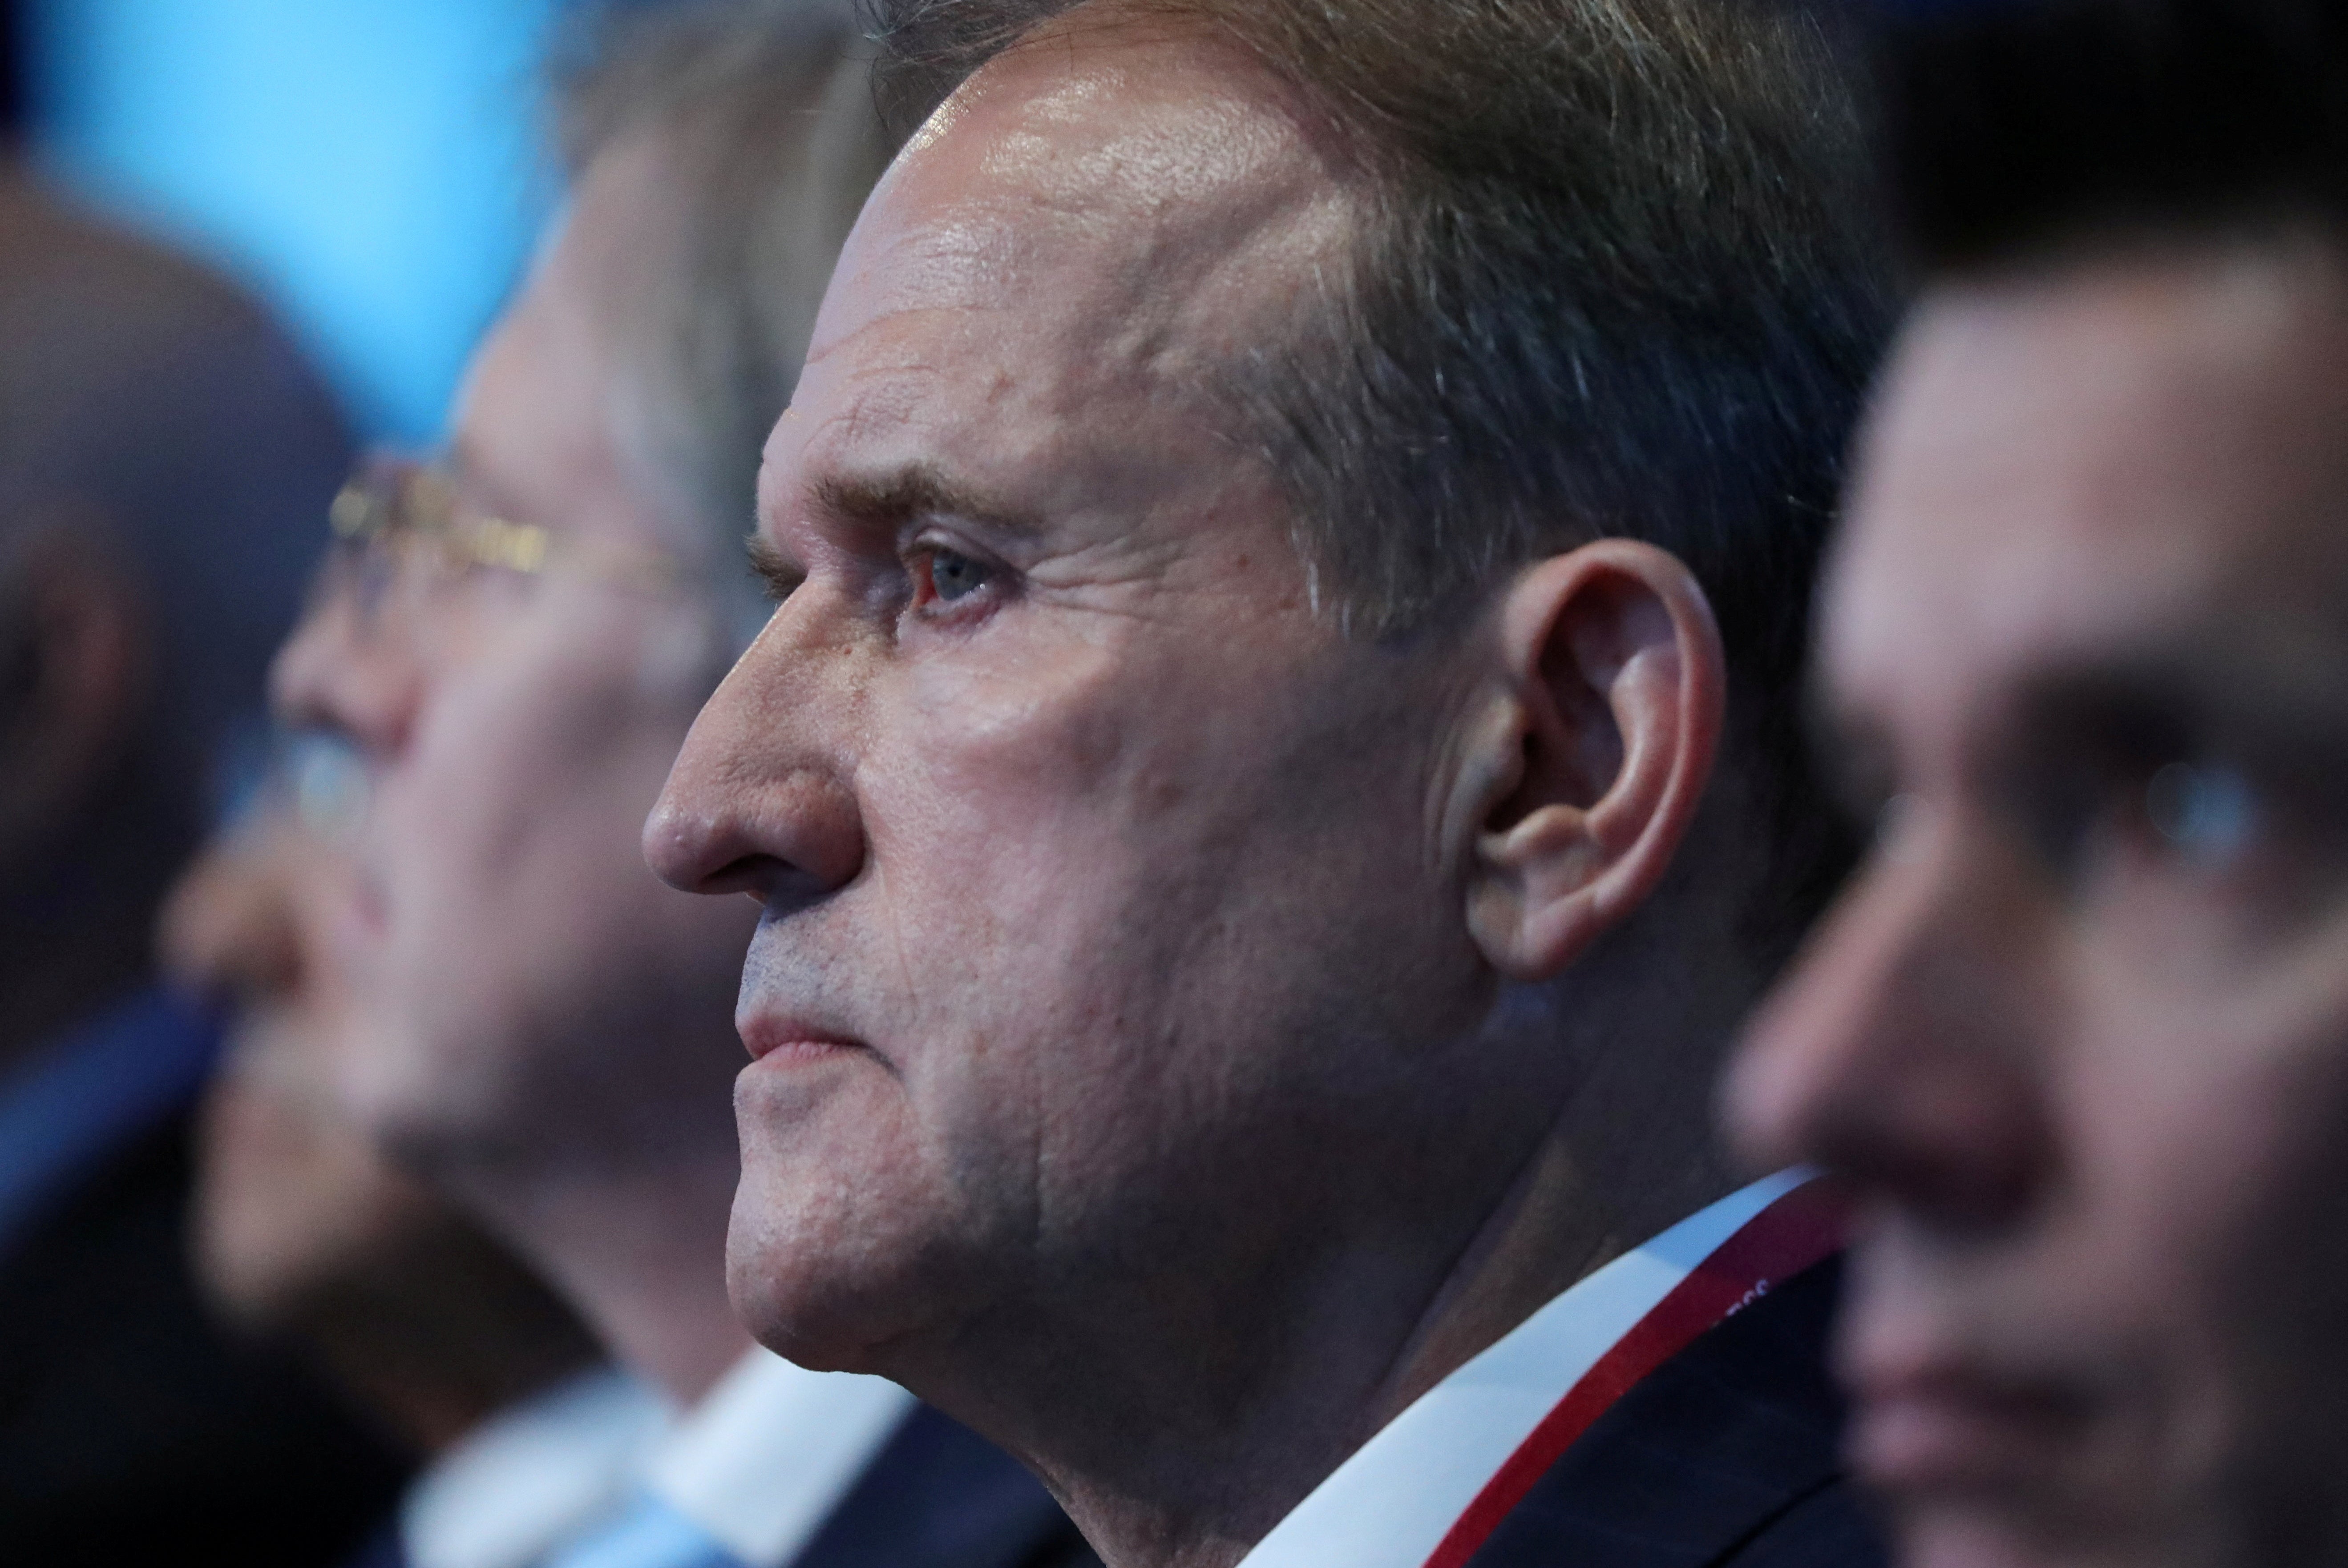 Viktor Medvedchuk is a key ally of Vladimir Putin and has been captured by Ukrainian forces